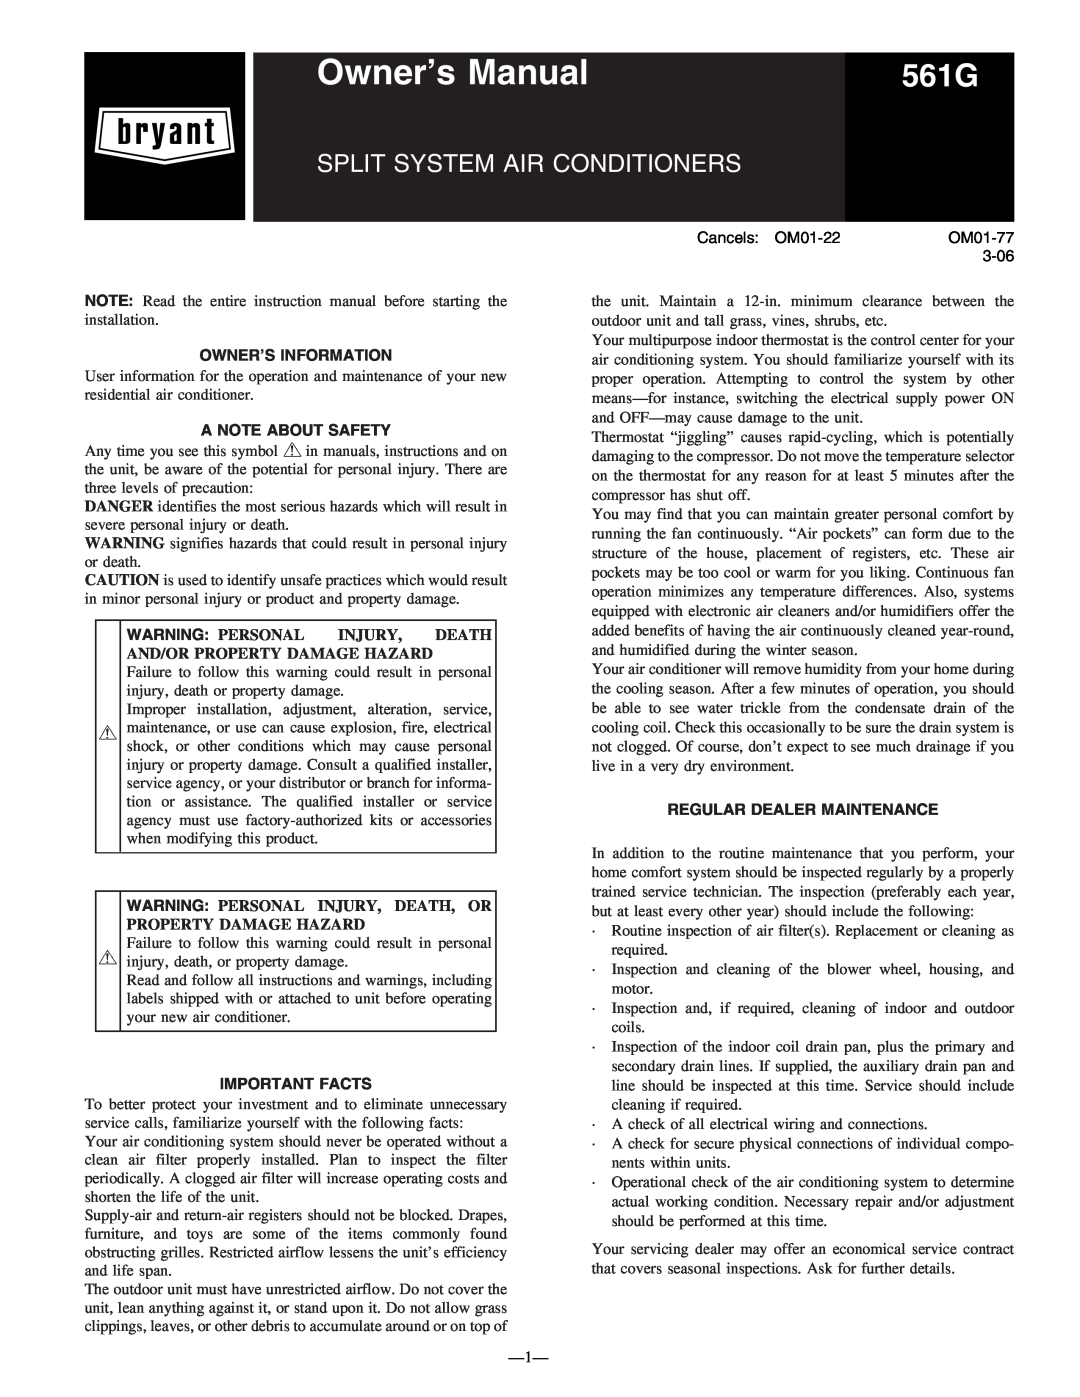 Bryant 561G owner manual Owner’S Information, A Note About Safety, Important Facts, Regular Dealer Maintenance 